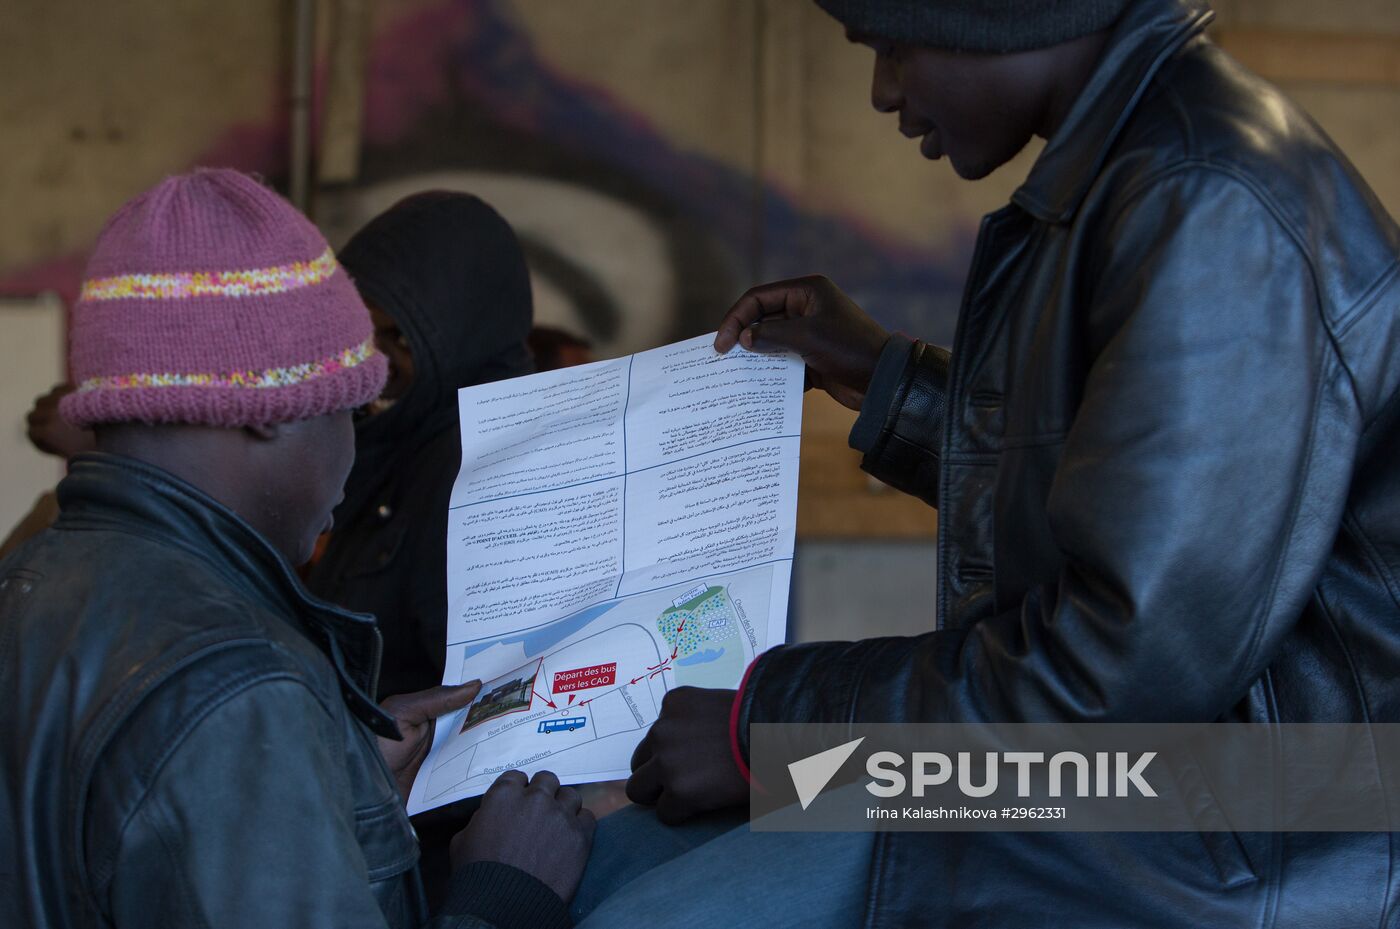 Update on refugee camp in Calais, France